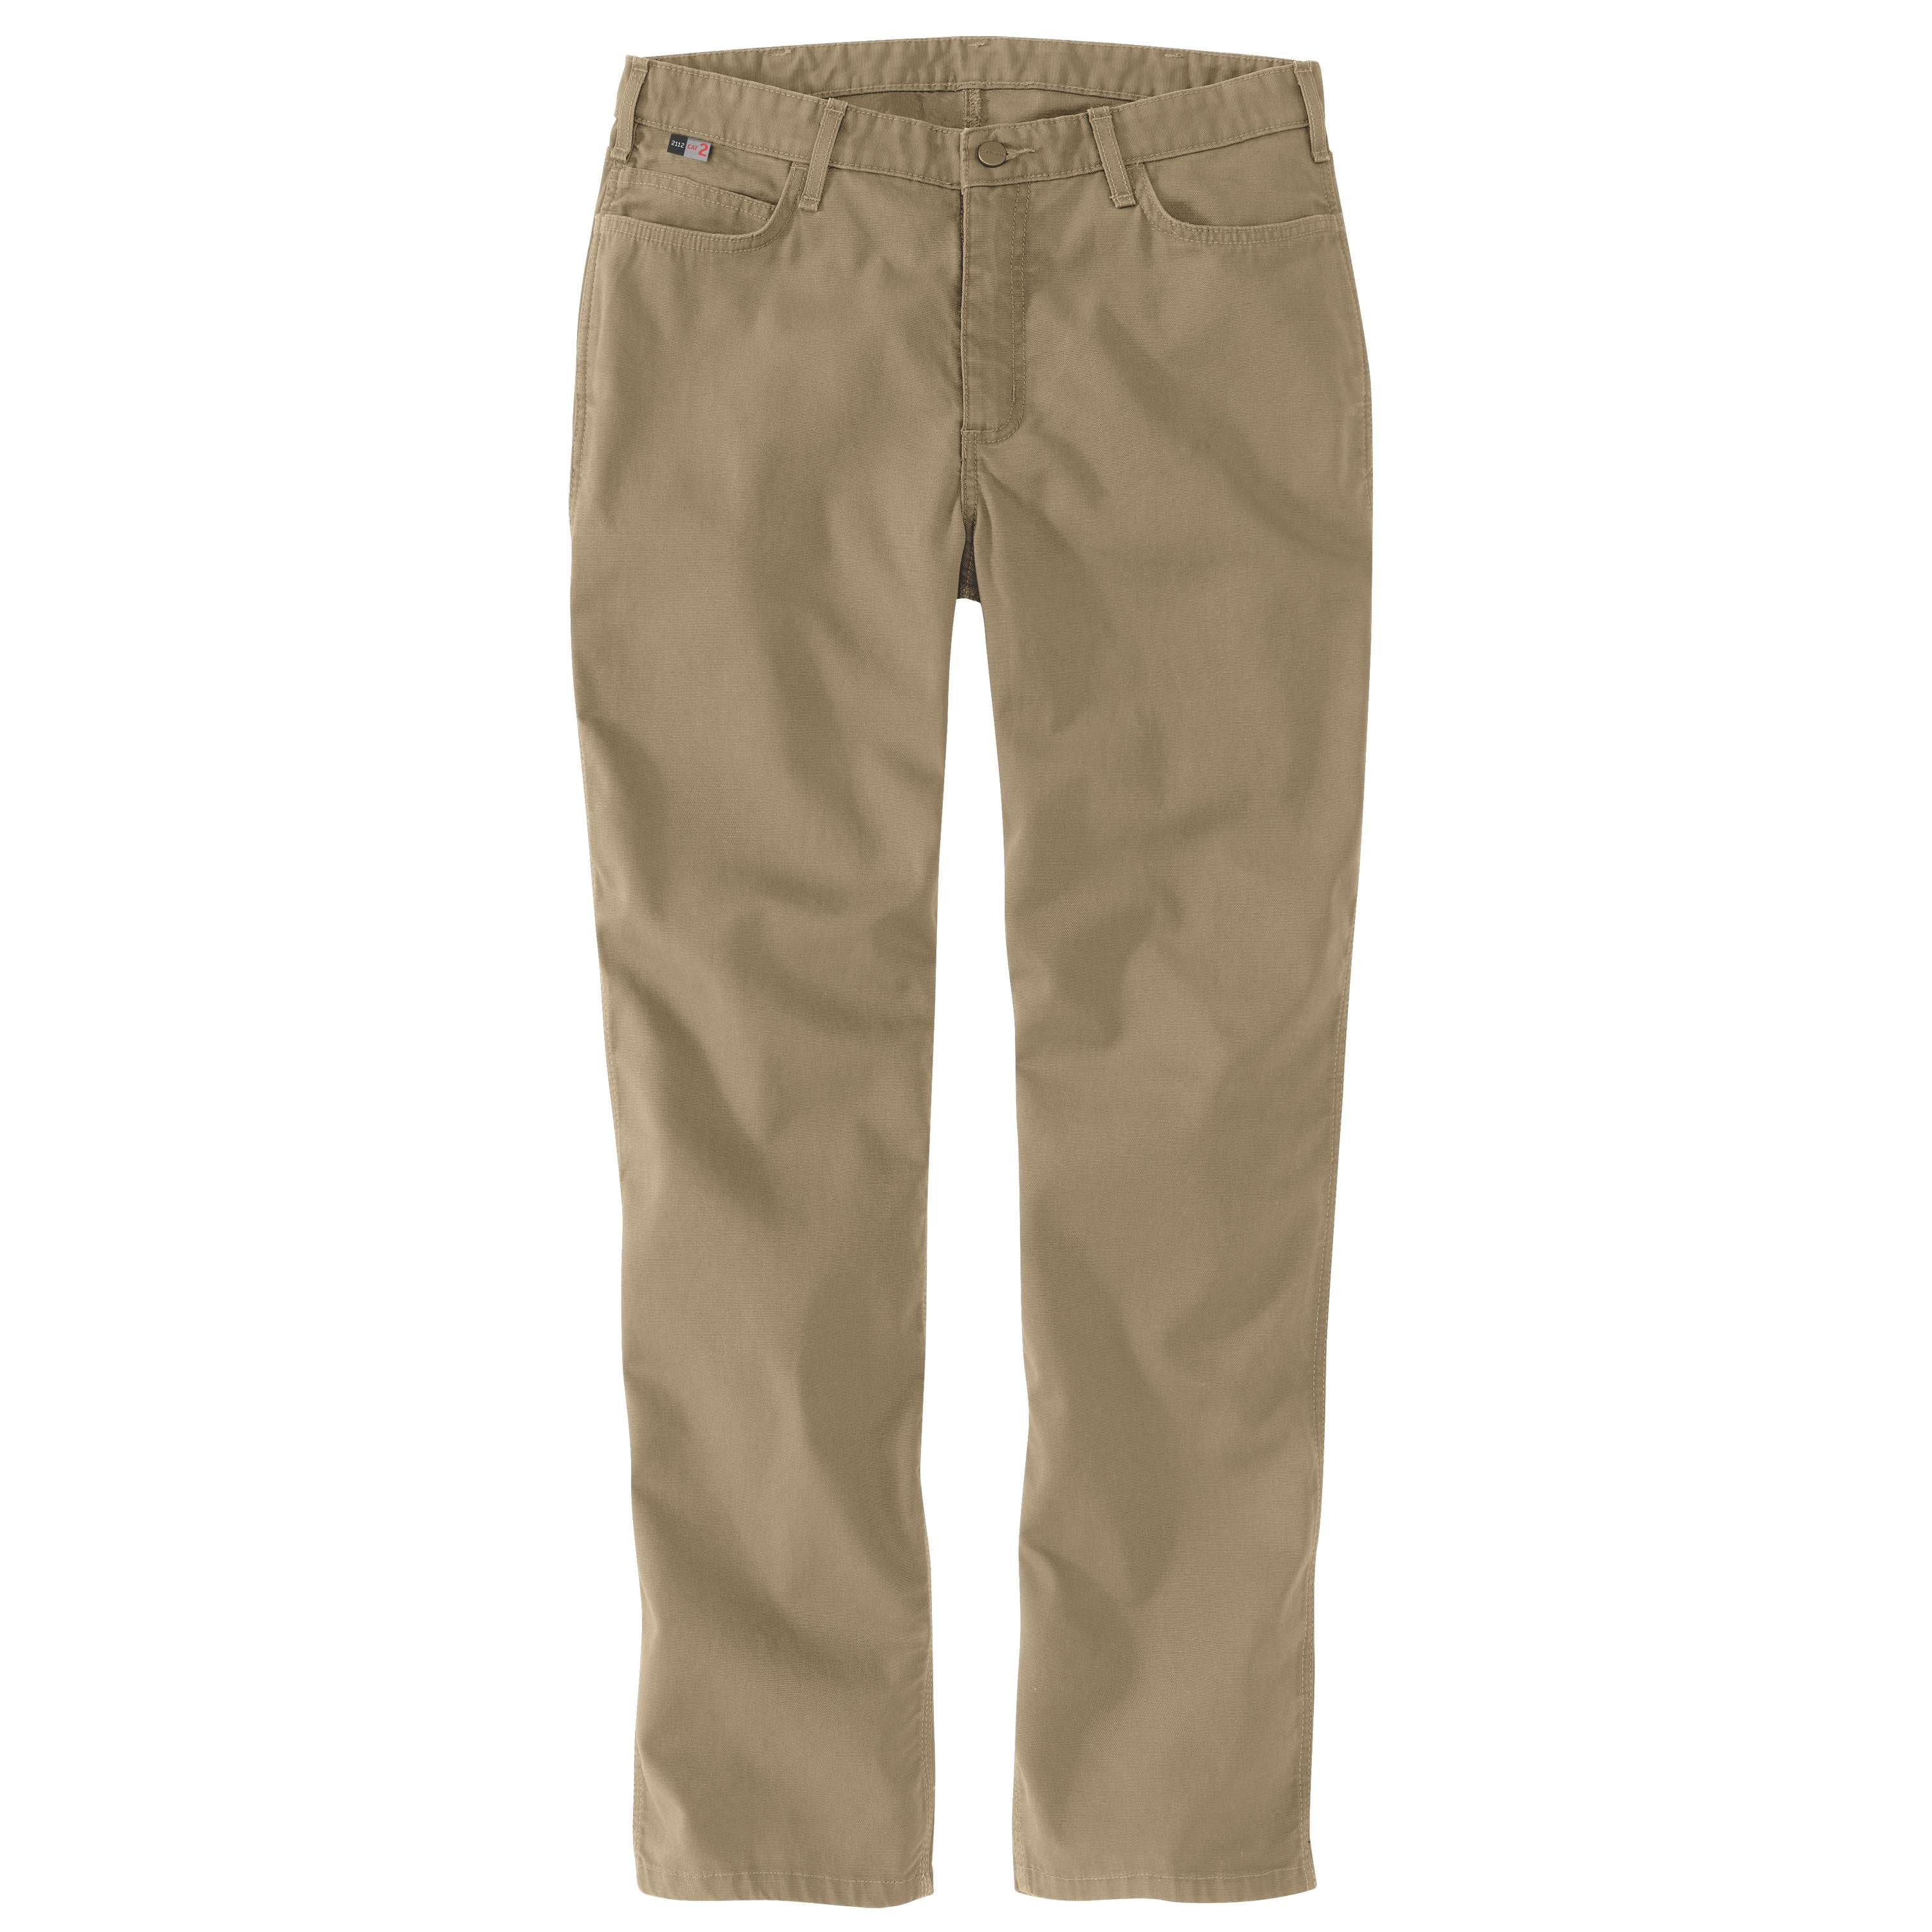 Carhartt Women's Flame-Resistant Rugged Flex Relaxed Fit Canvas Work ...